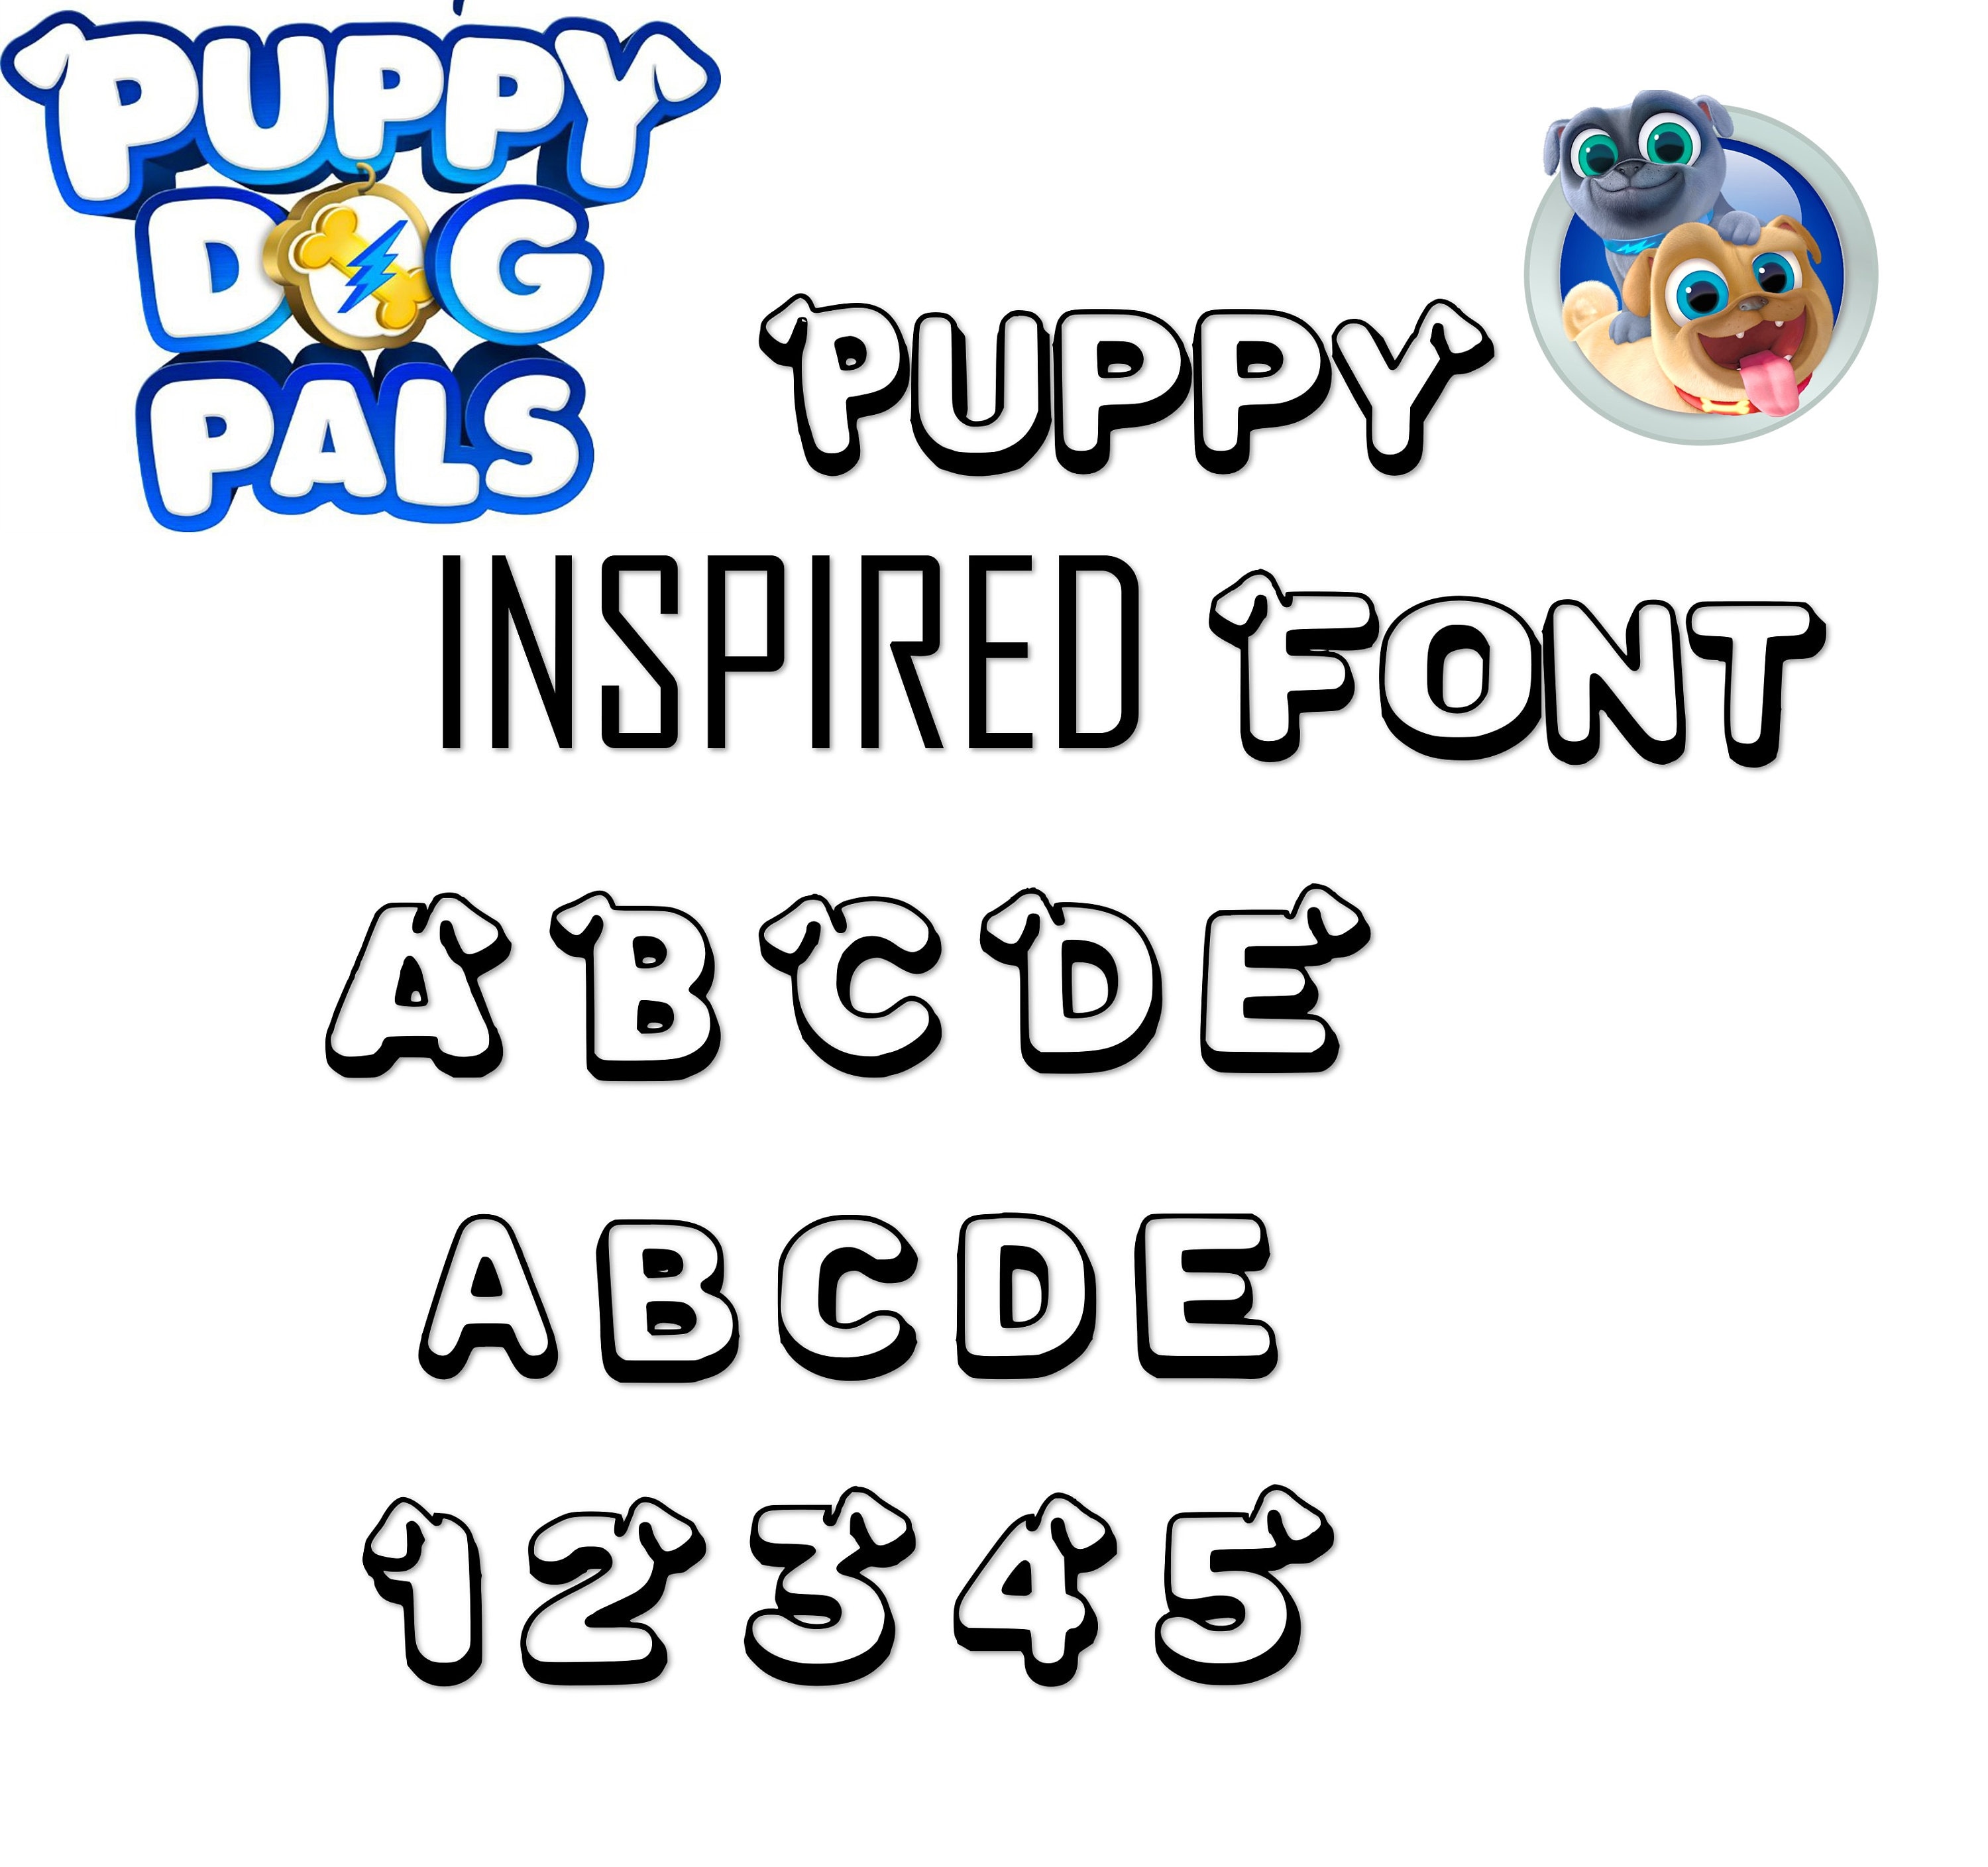 Puppy dog pals INSPIRED font True Type. To install and write Etsy